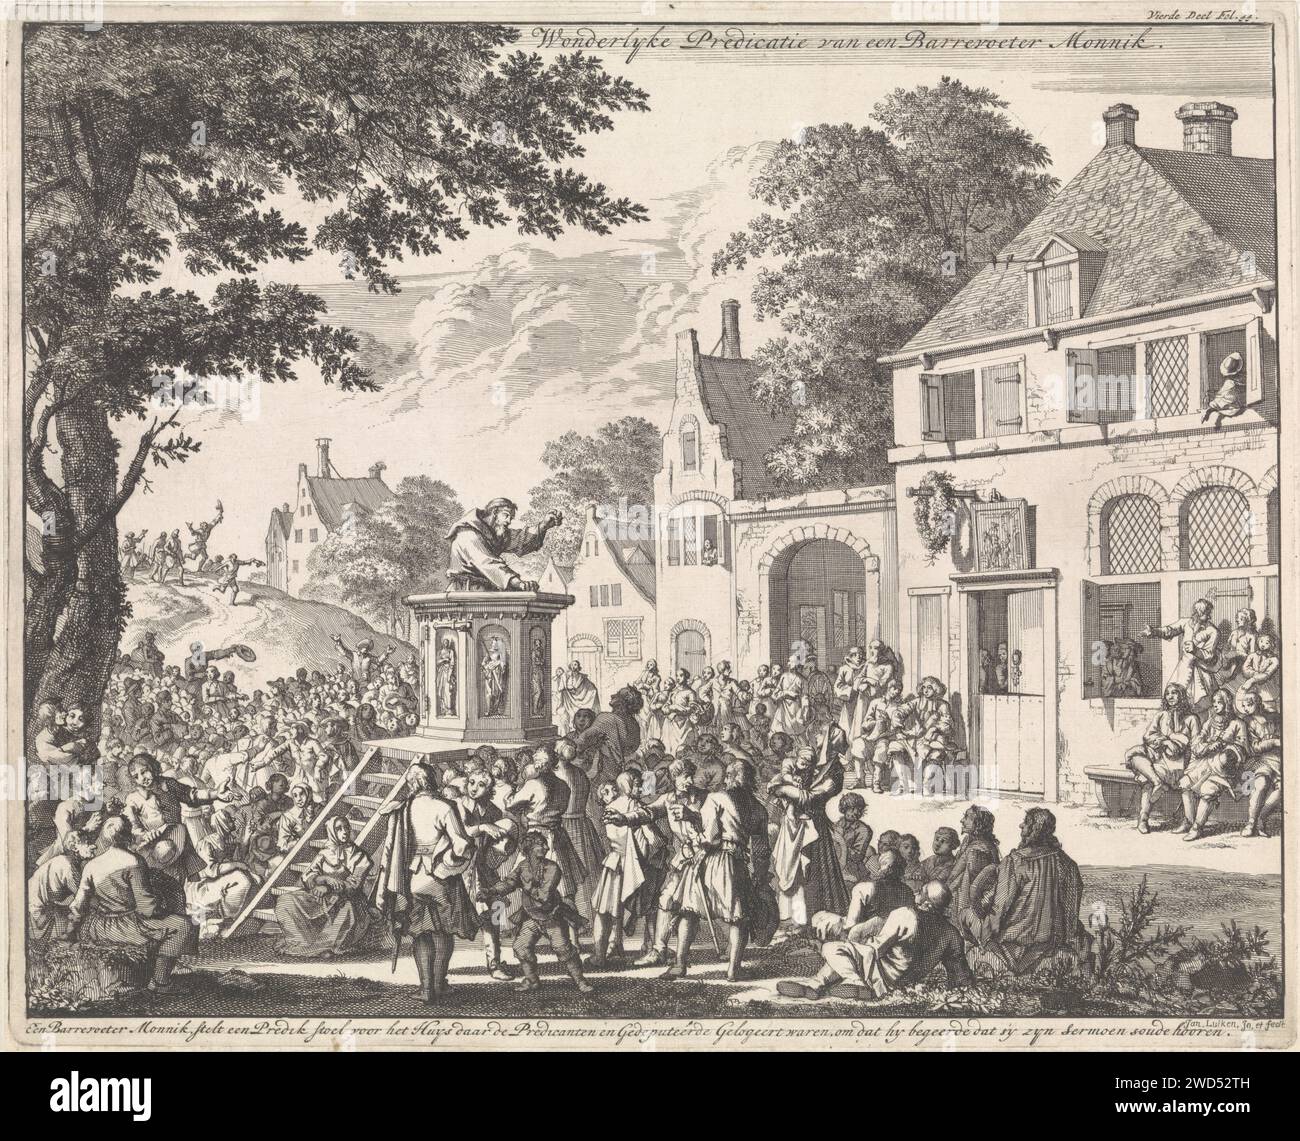 Monnik preaching from a pulpit opposite an inn, Jan Luyken, 1696 print Print at the top right marked: Fourth part fol. 44. Amsterdam paper etching monk(s), friar(s). sermon  Protestant service - QQ - field conventicle, hedge sermon. hotel, hostelry, inn Stock Photo